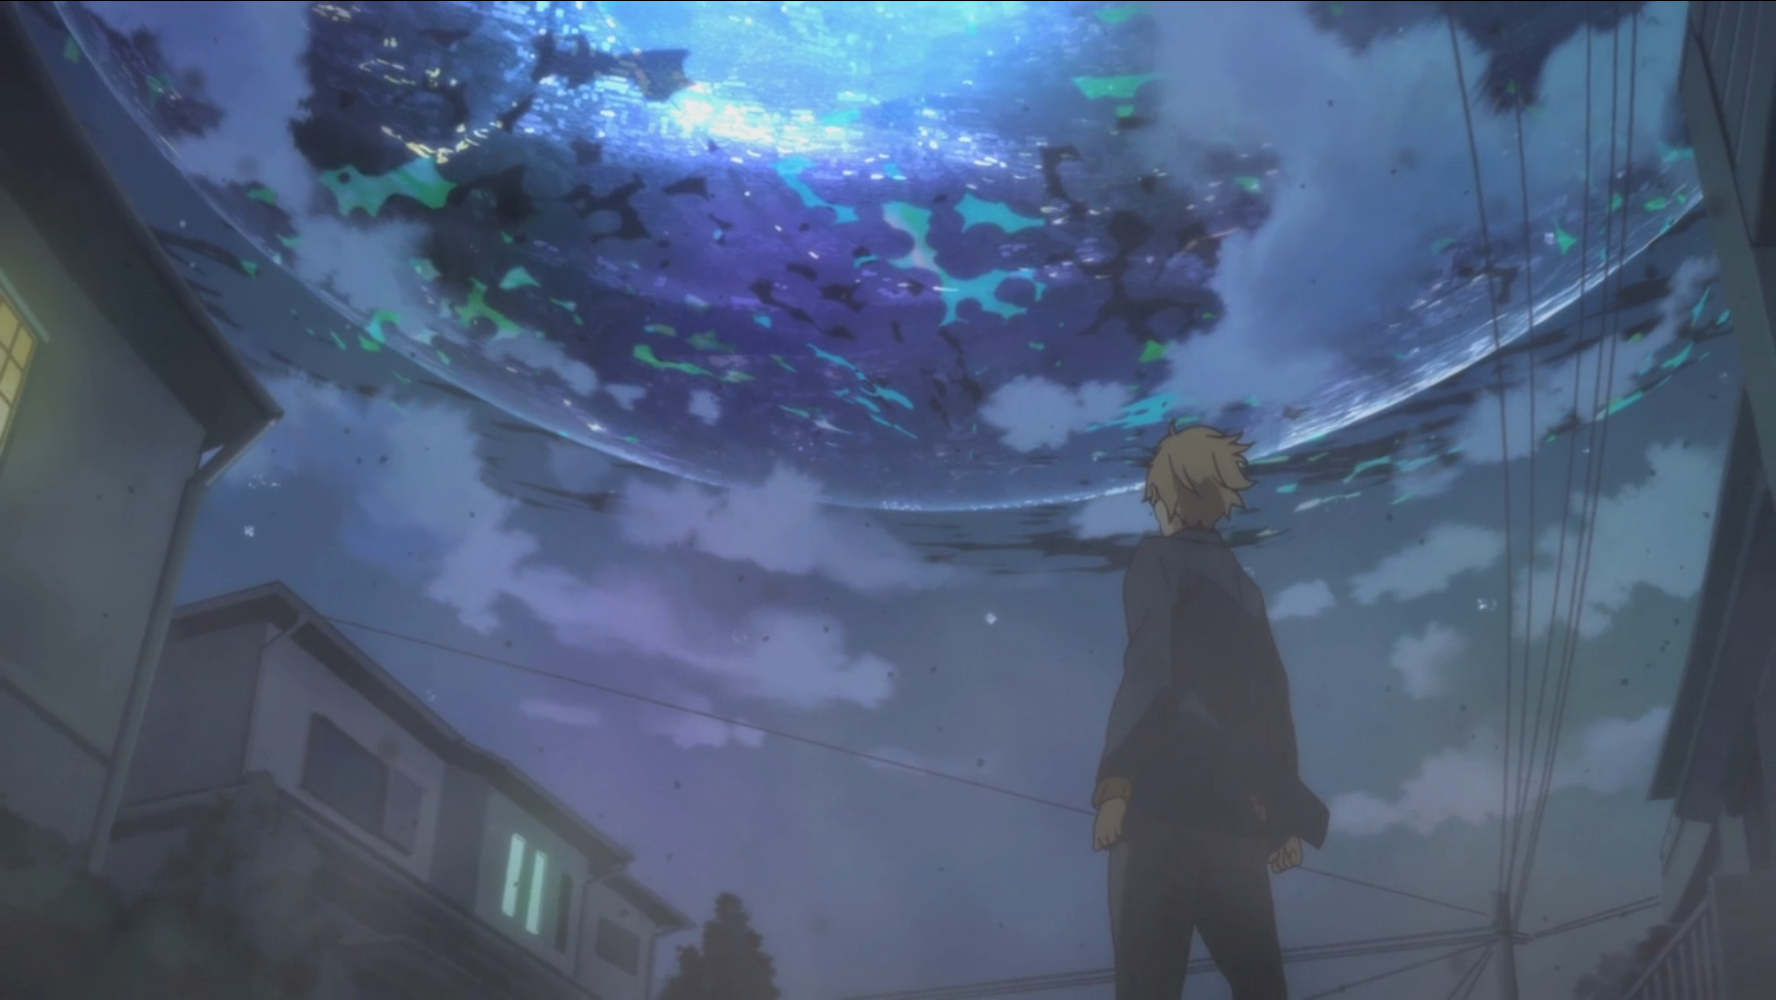 Akihito Kanbara observes the legendary yomu known as 'Beyond the Boundary' descending from the night sky in a scene from the 2013 Beyond the Boundary TV anime.